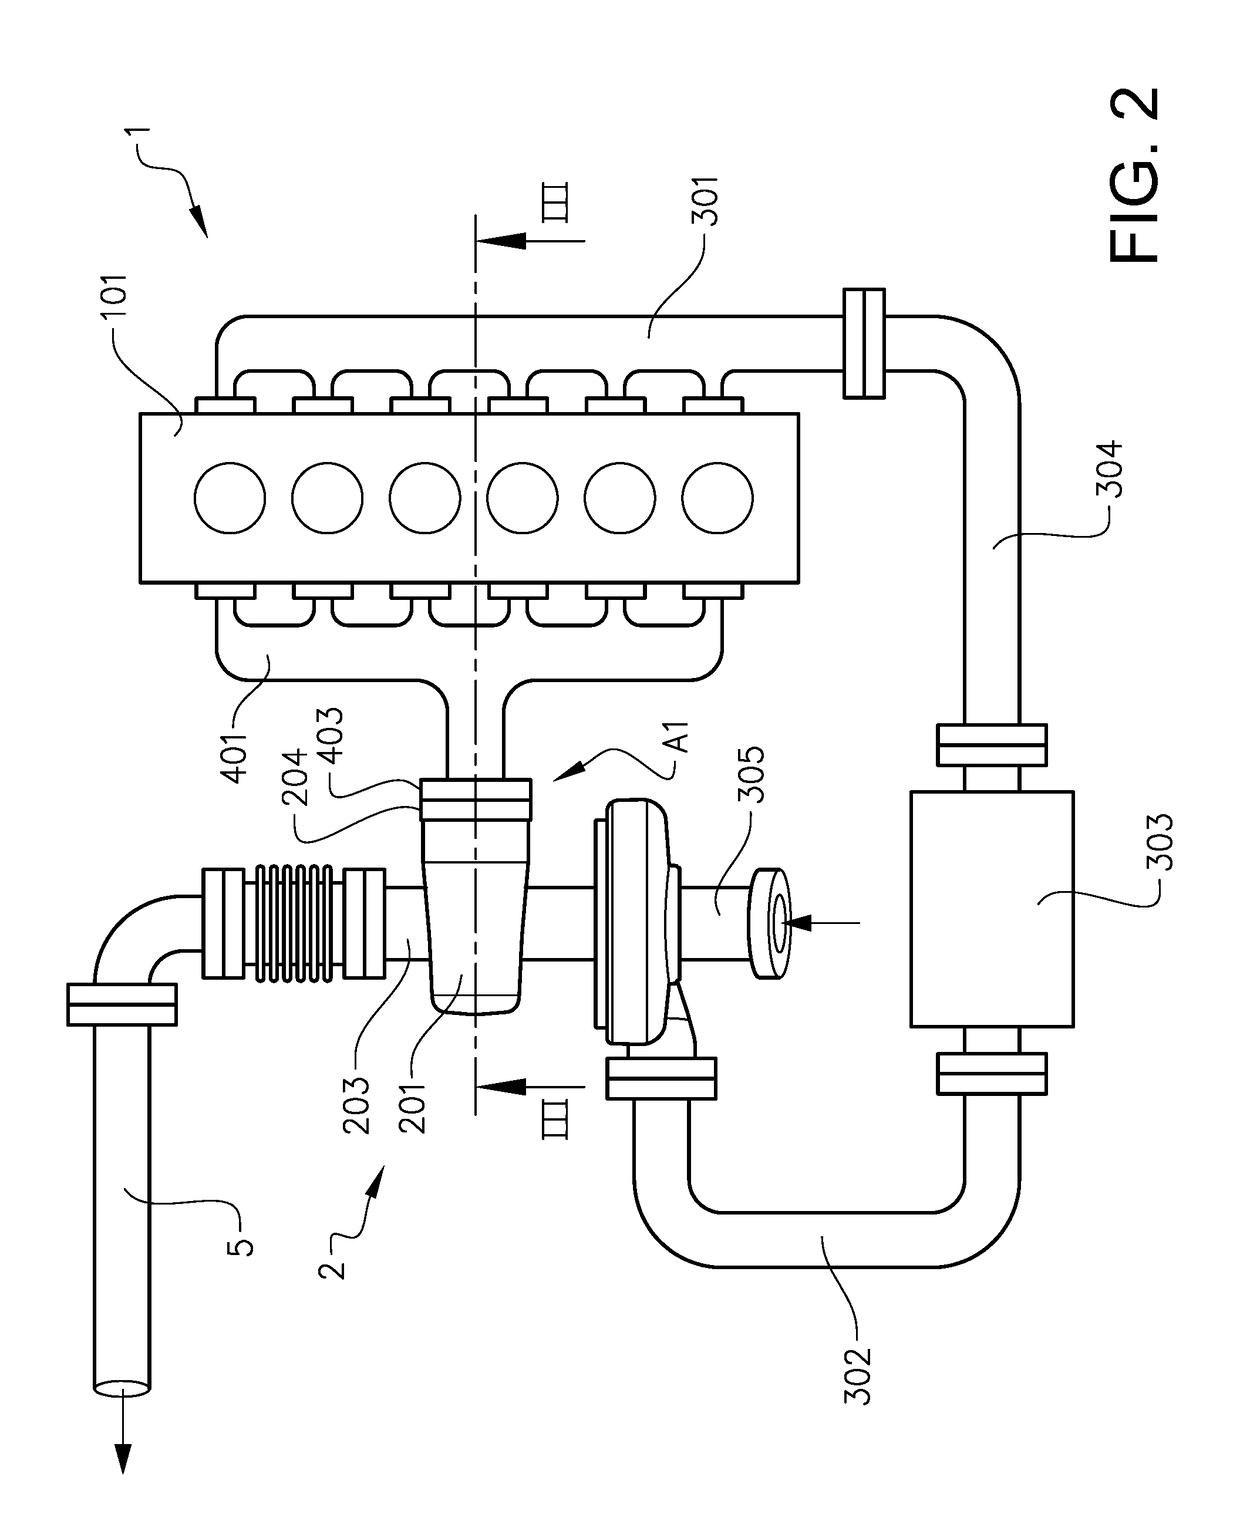 Conduit connection assembly, a turbine inlet conduit, a turbo charger and a vehicle